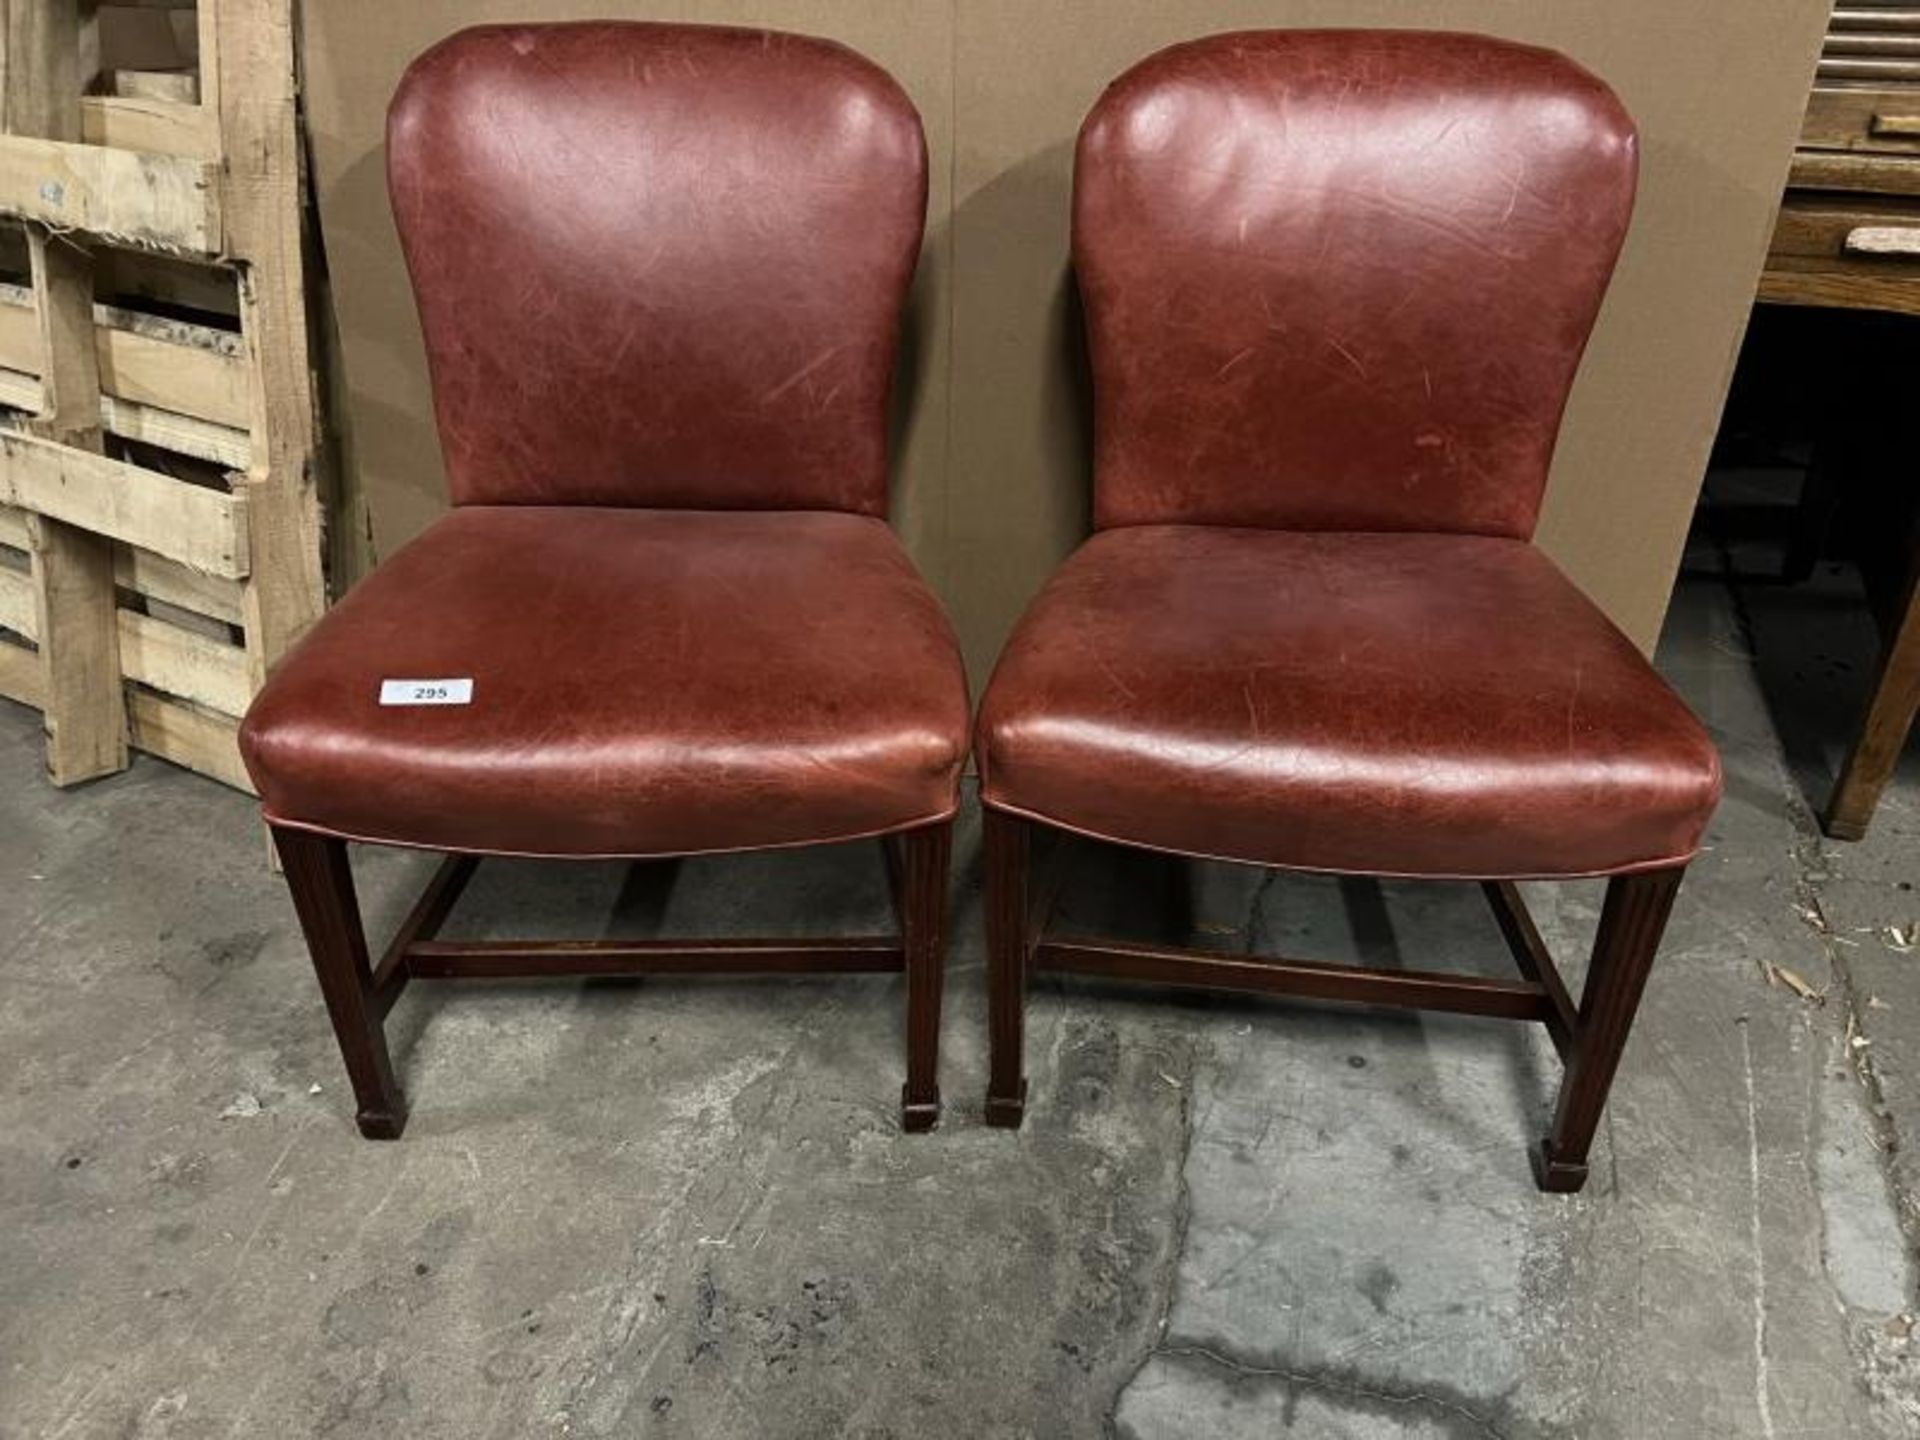 Pair of Red Vinyl Chairs; Located in Mill Building